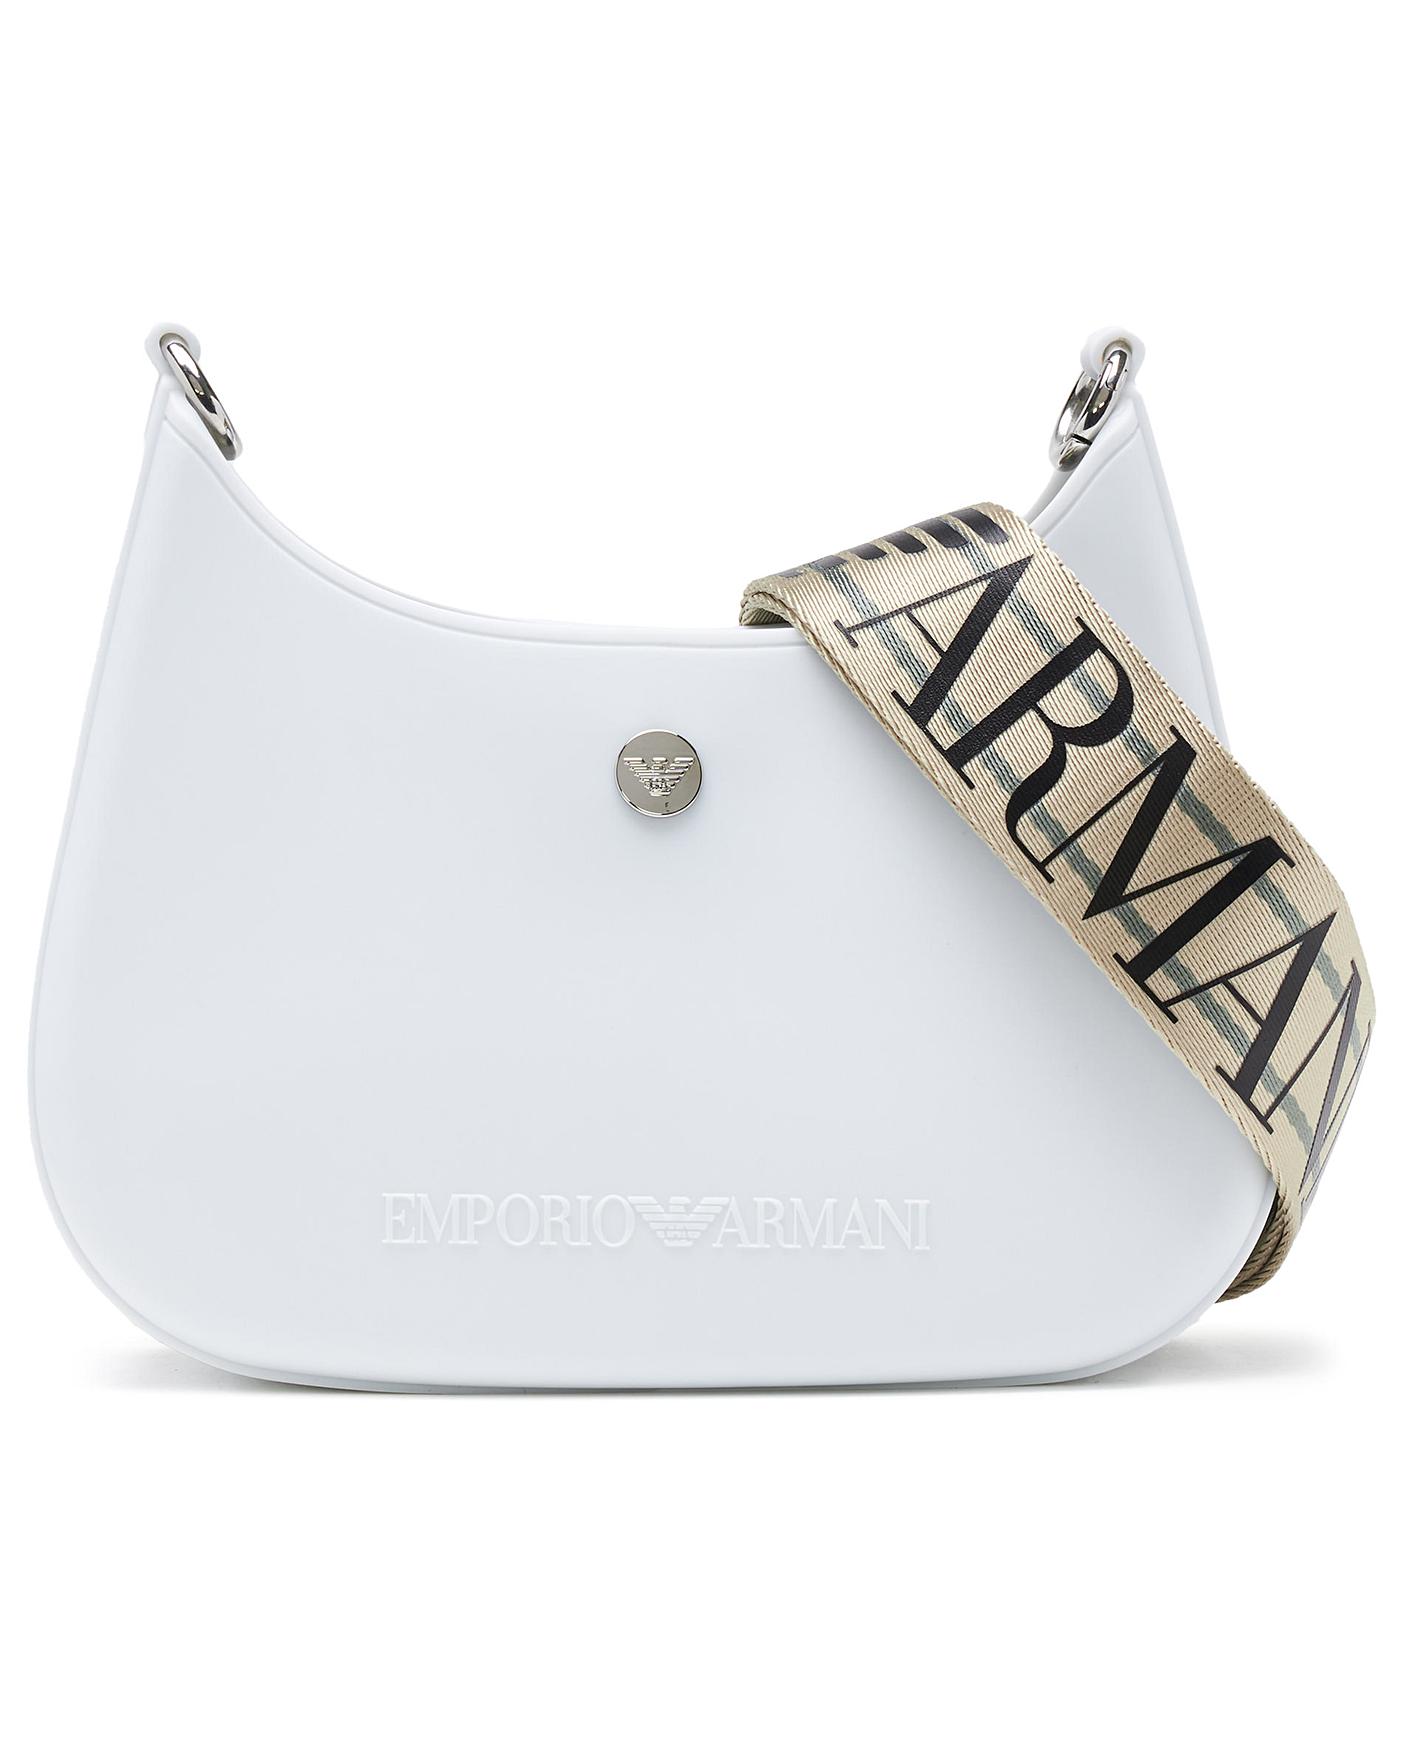 Emporio Armani Recycled Pvc Gummy Shoulder Bag in White